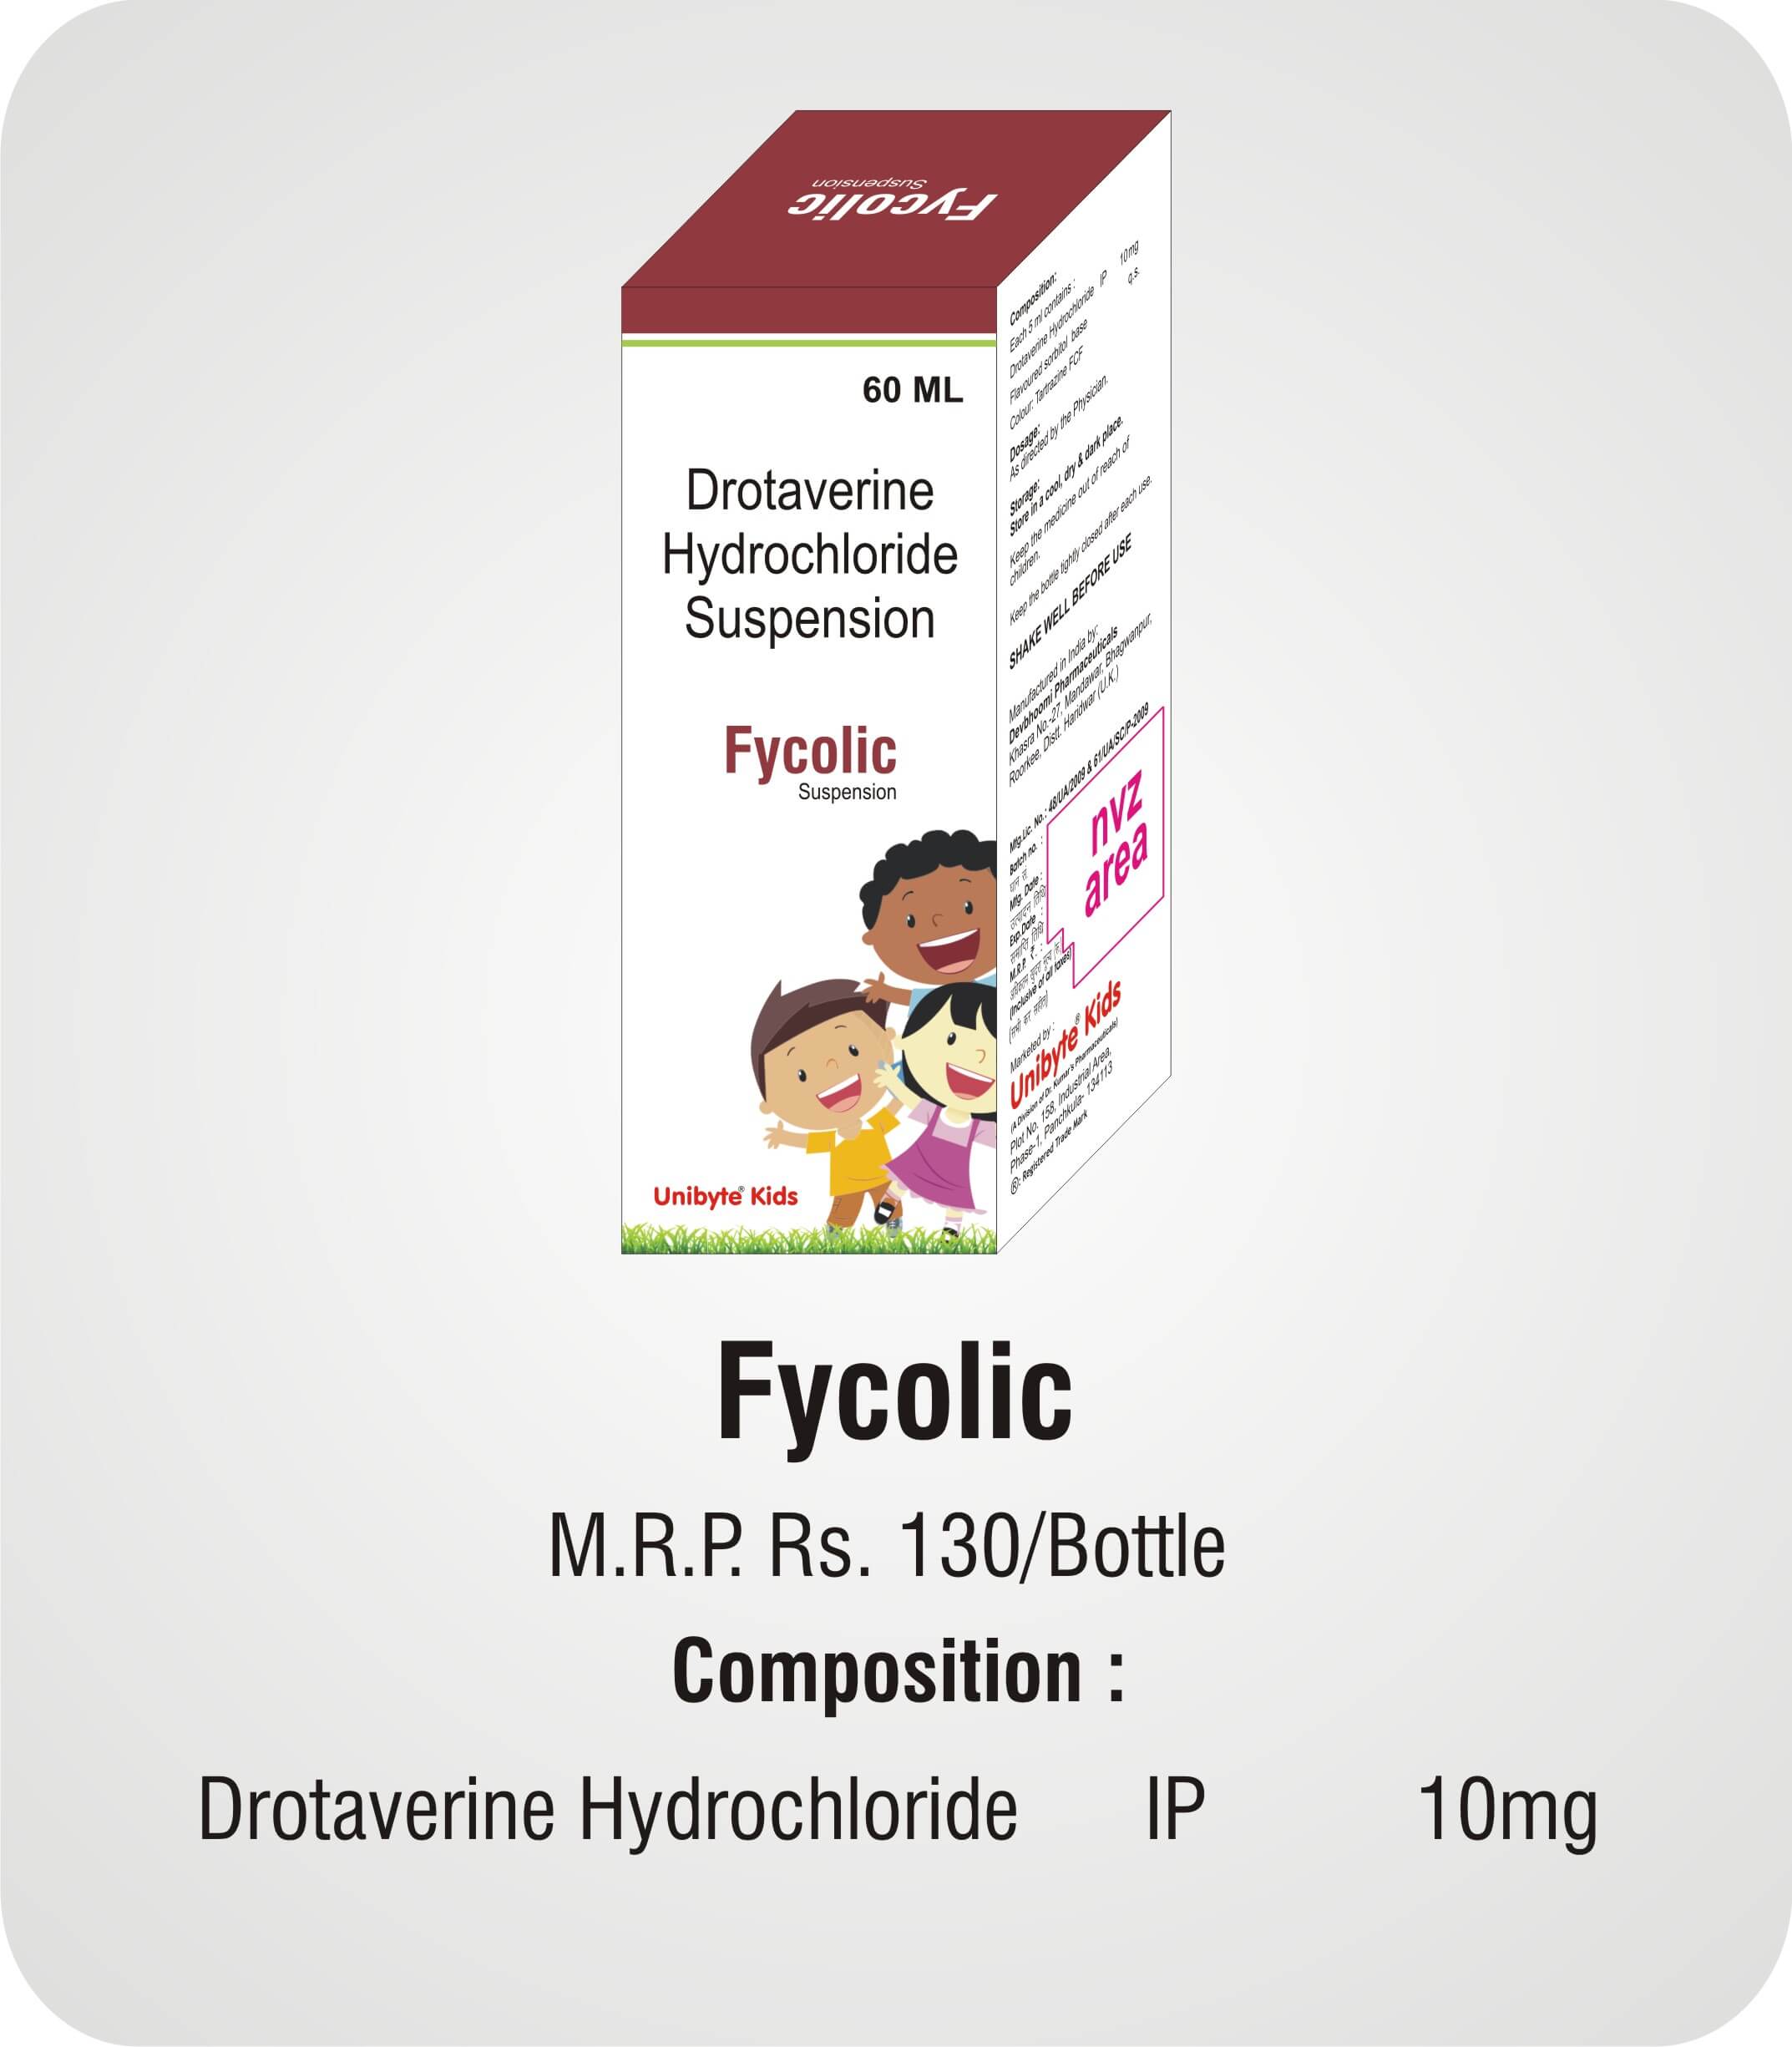 Fycolic